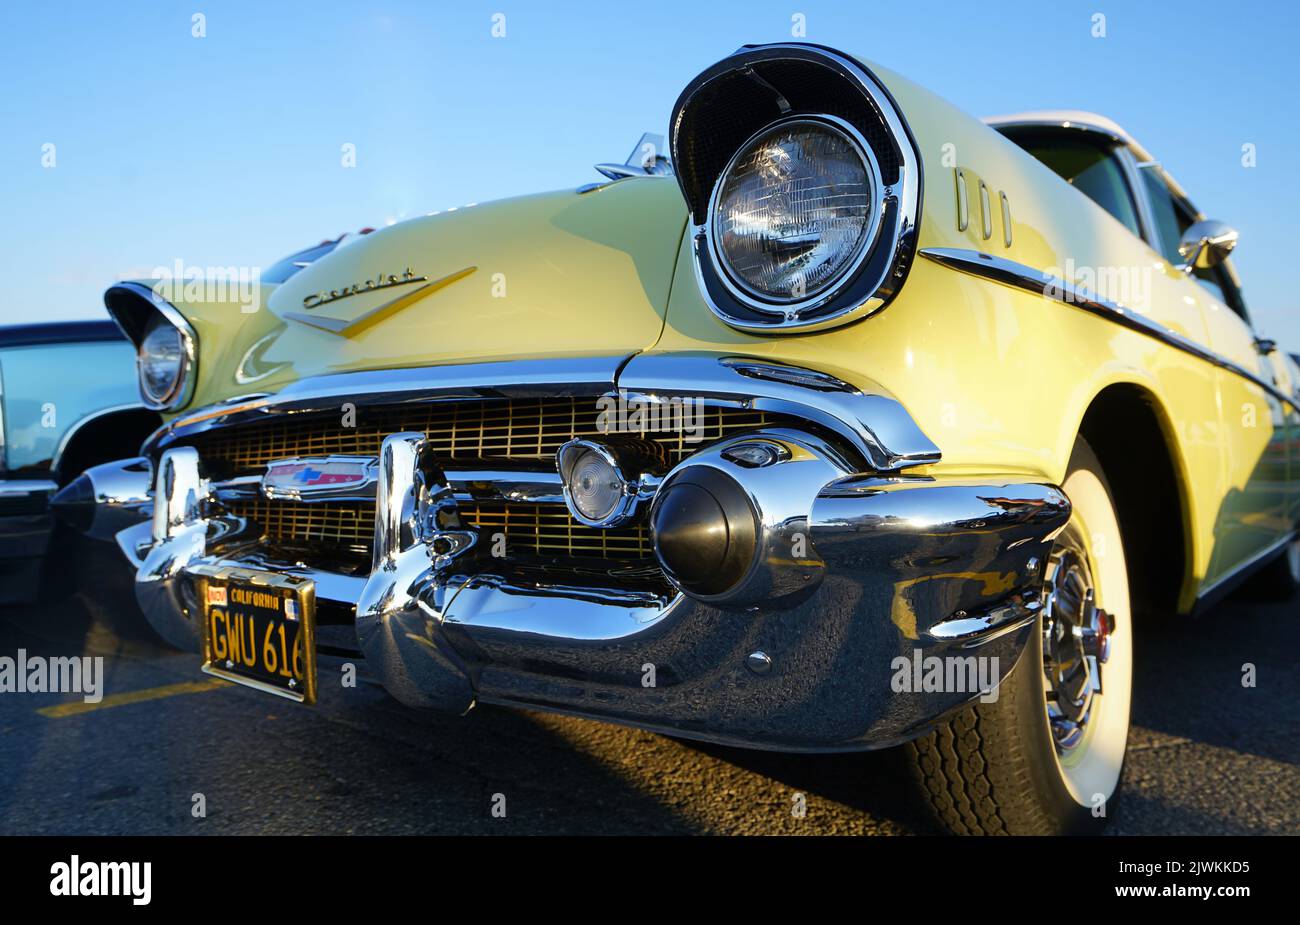 Front view of a classic Chevrolet automobile .Montreal.Quebec,Canada.Alamy Live News/Mario Beauregard Stock Photo